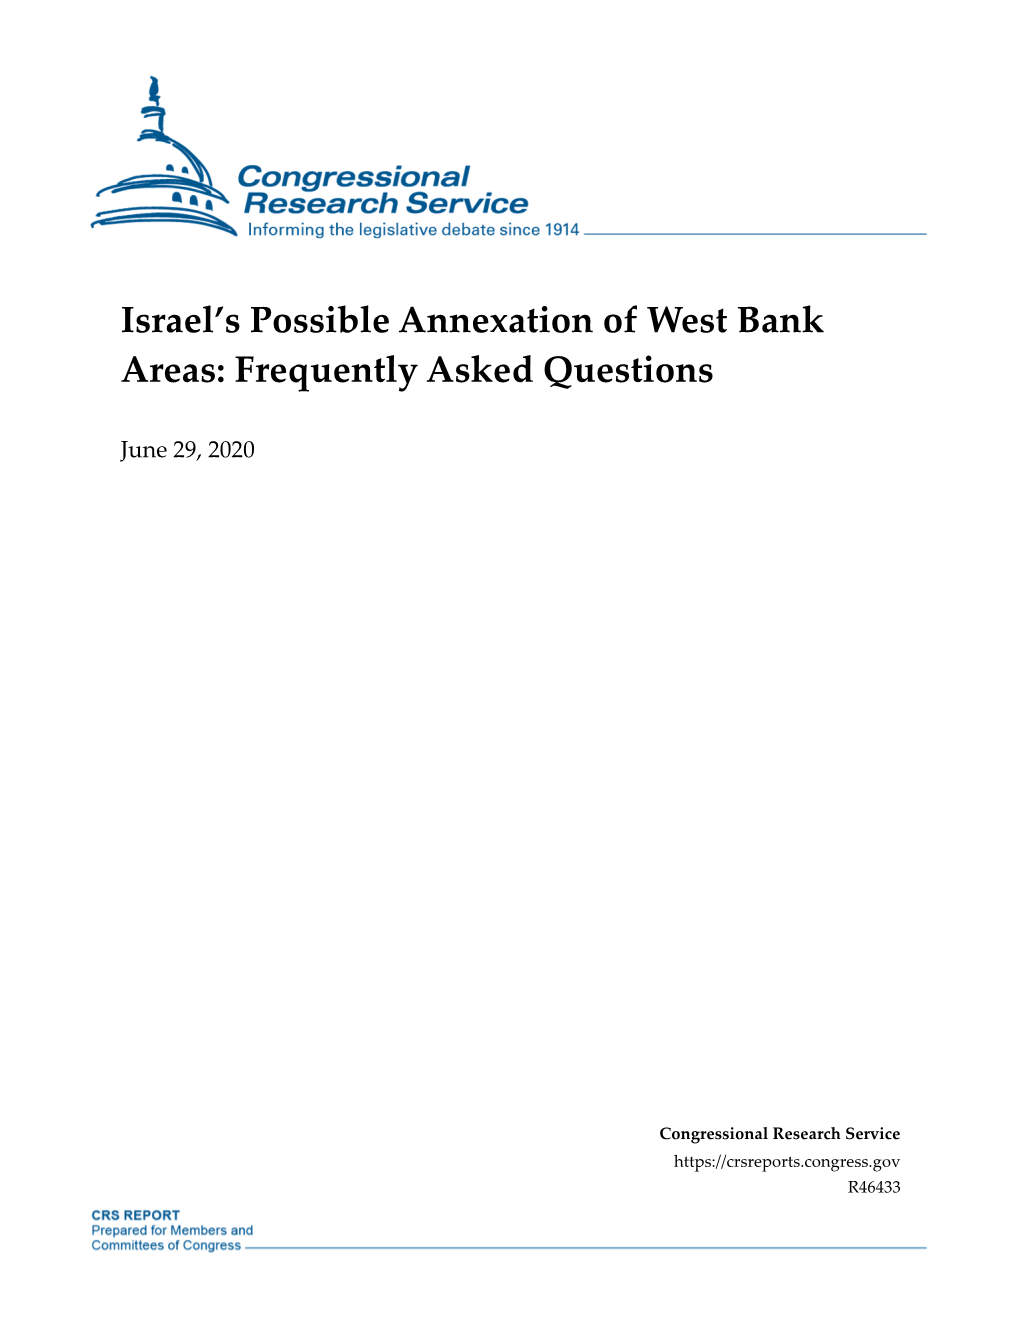 Israel's Possible Annexation of West Bank Areas